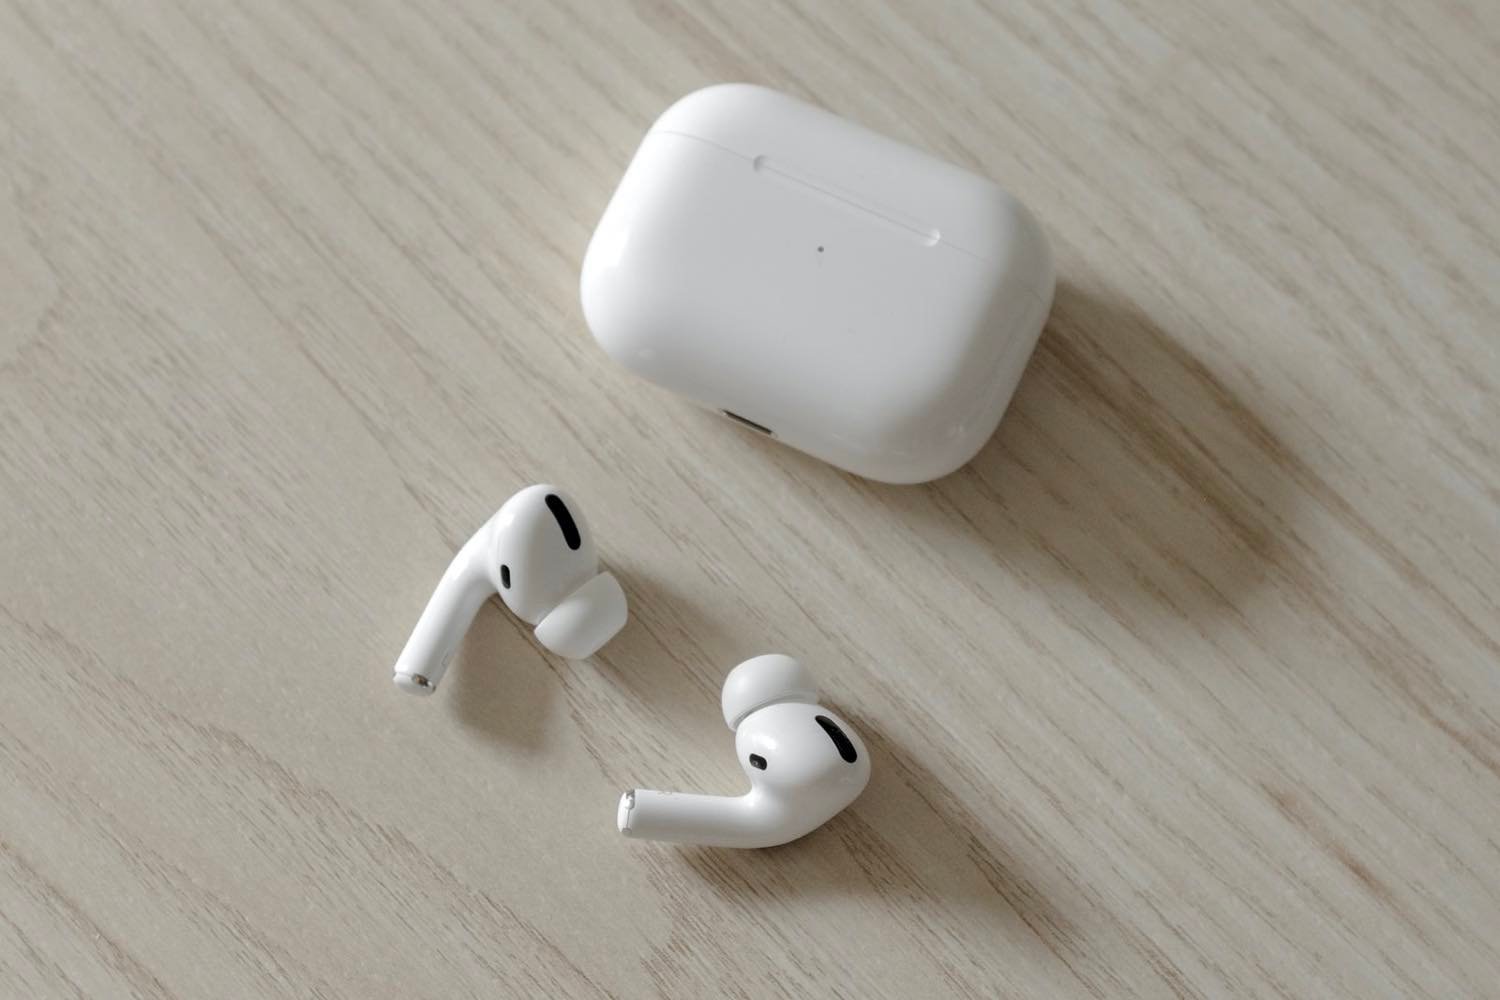 Amazon&#39;s Best Selling Apple AirPods Pro Available On Sale For $199 ($49 OFF) - TheAppleTech